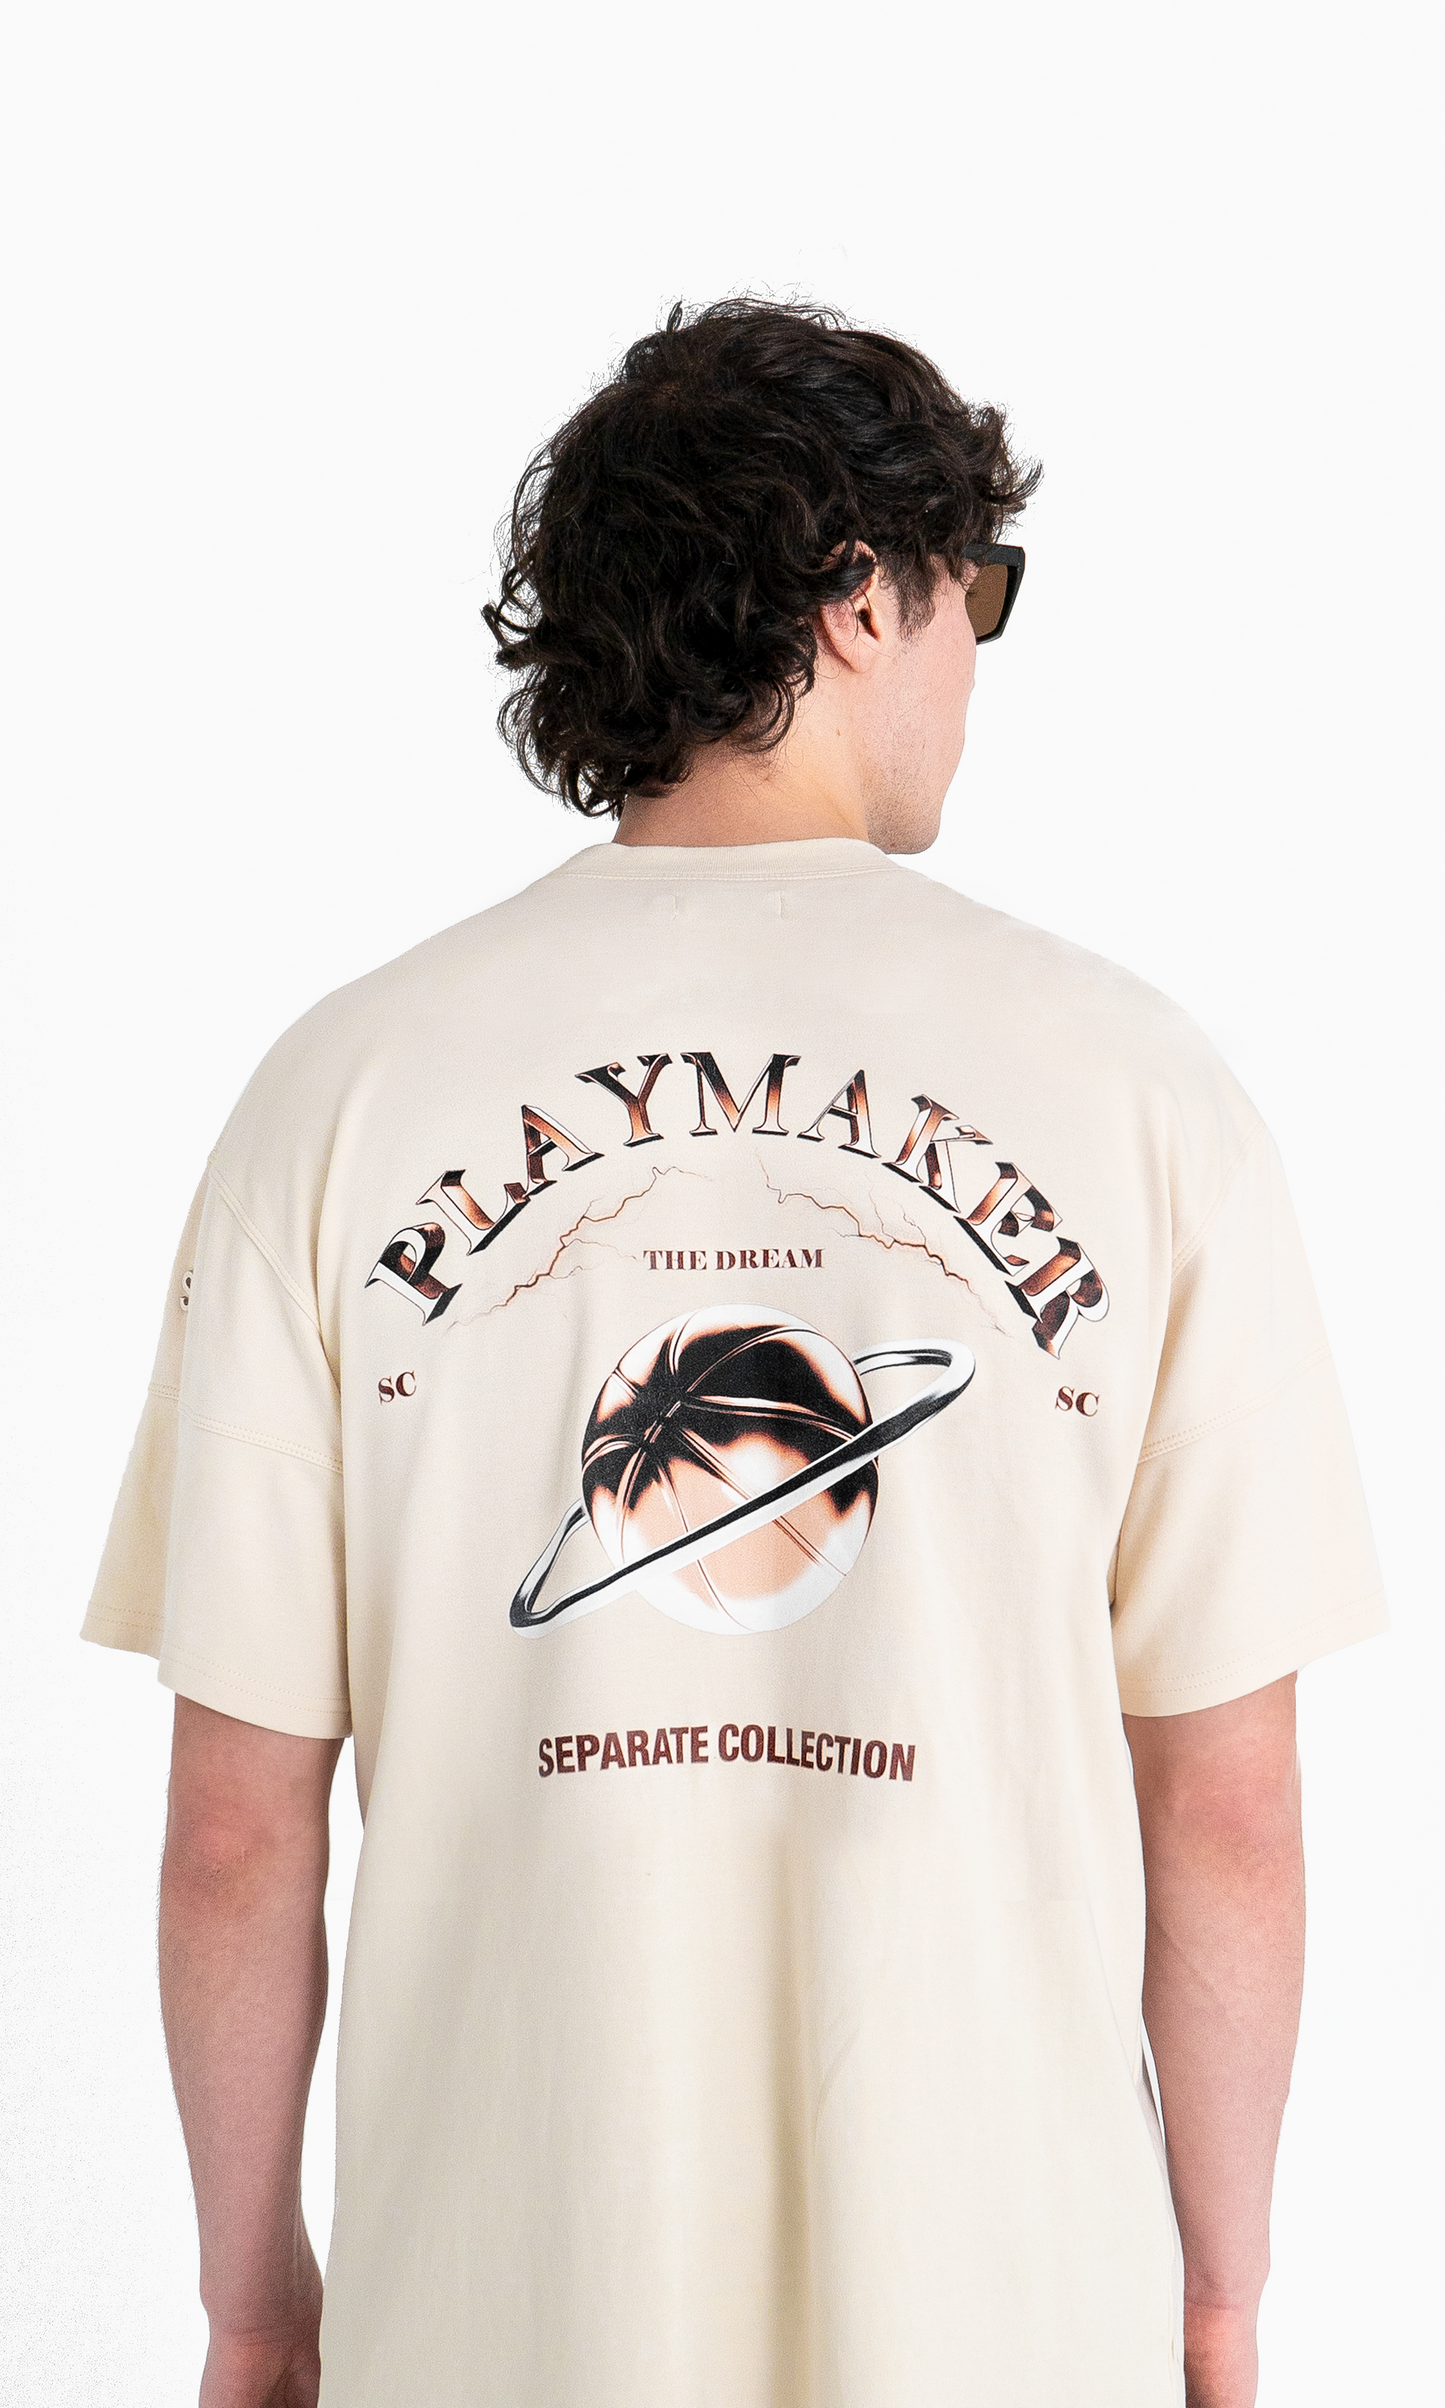 Separate Collection© Playmaker T-shirt